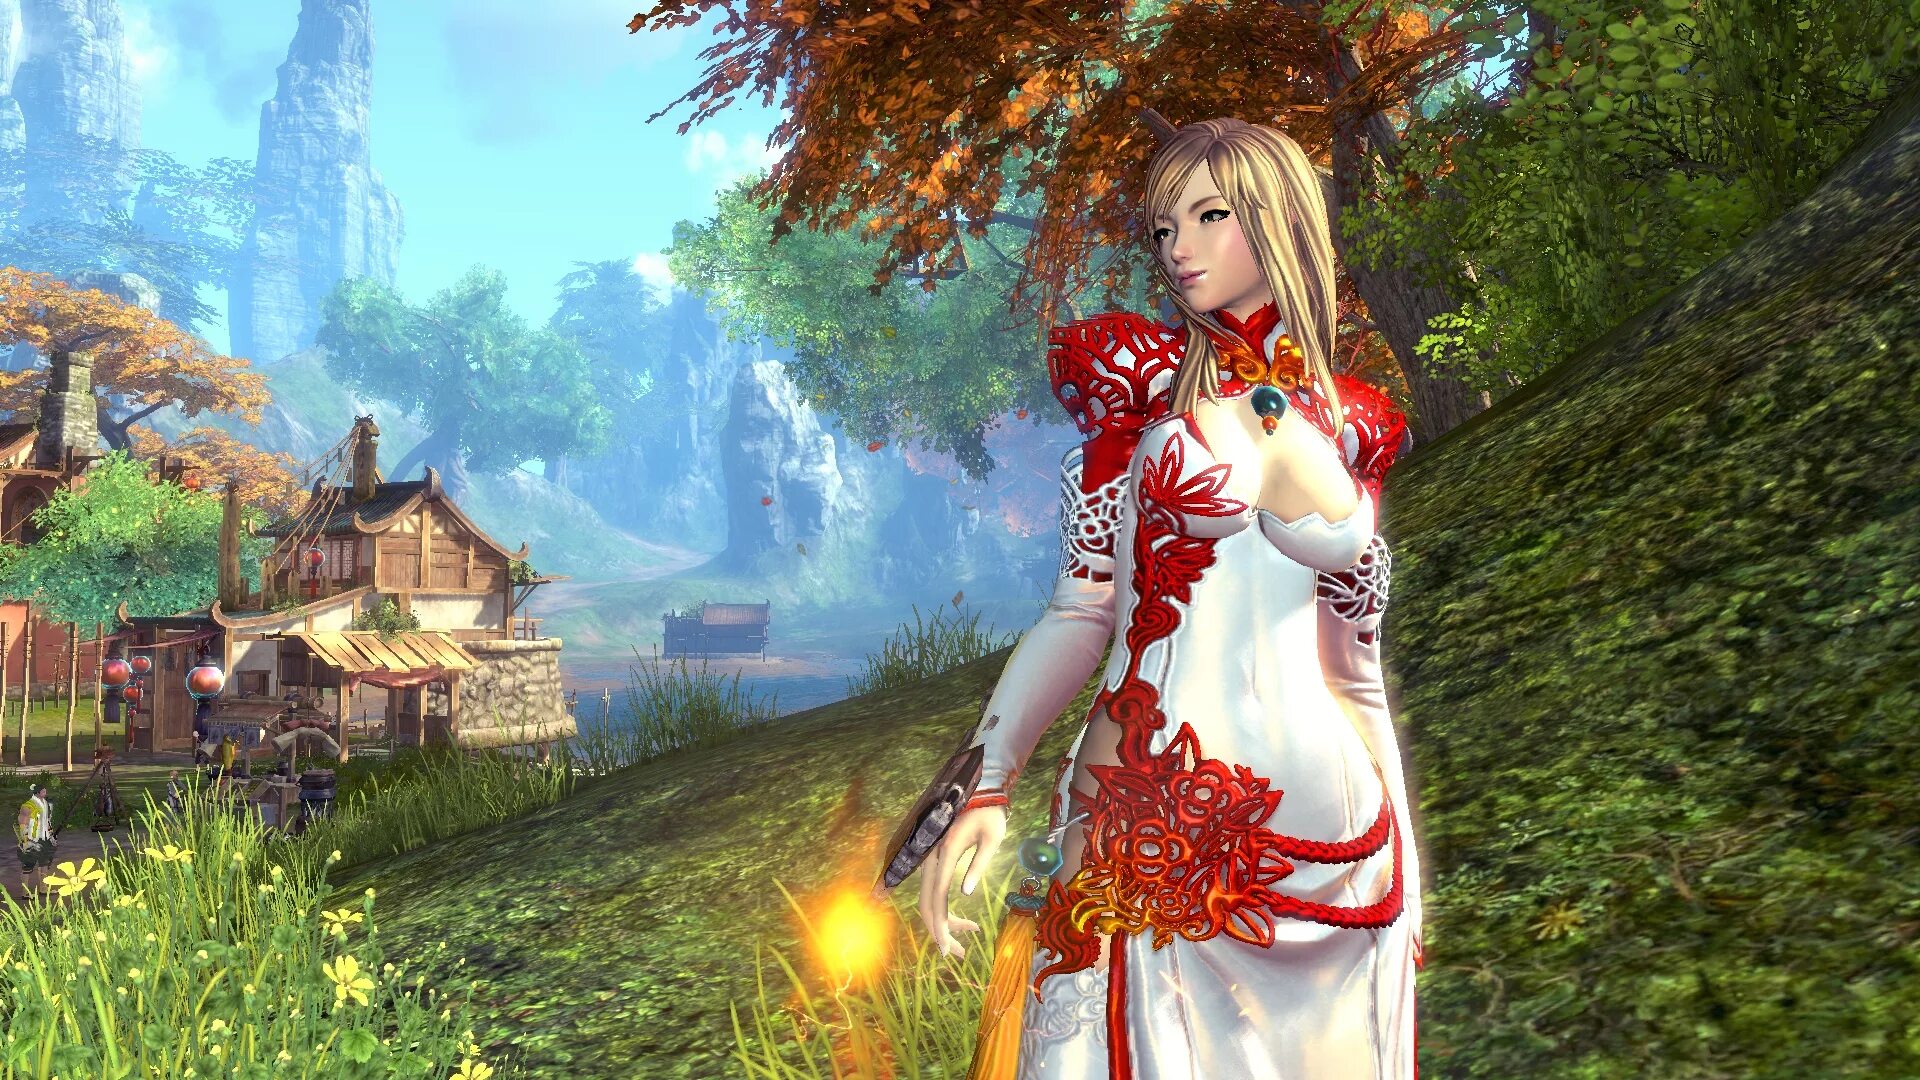 Blade and Soul системные требования 2021. Blade and Soul 2 системные требования. Blade and Soul системные требования 2022. Блад энд соул тату. Blade soul системные требования